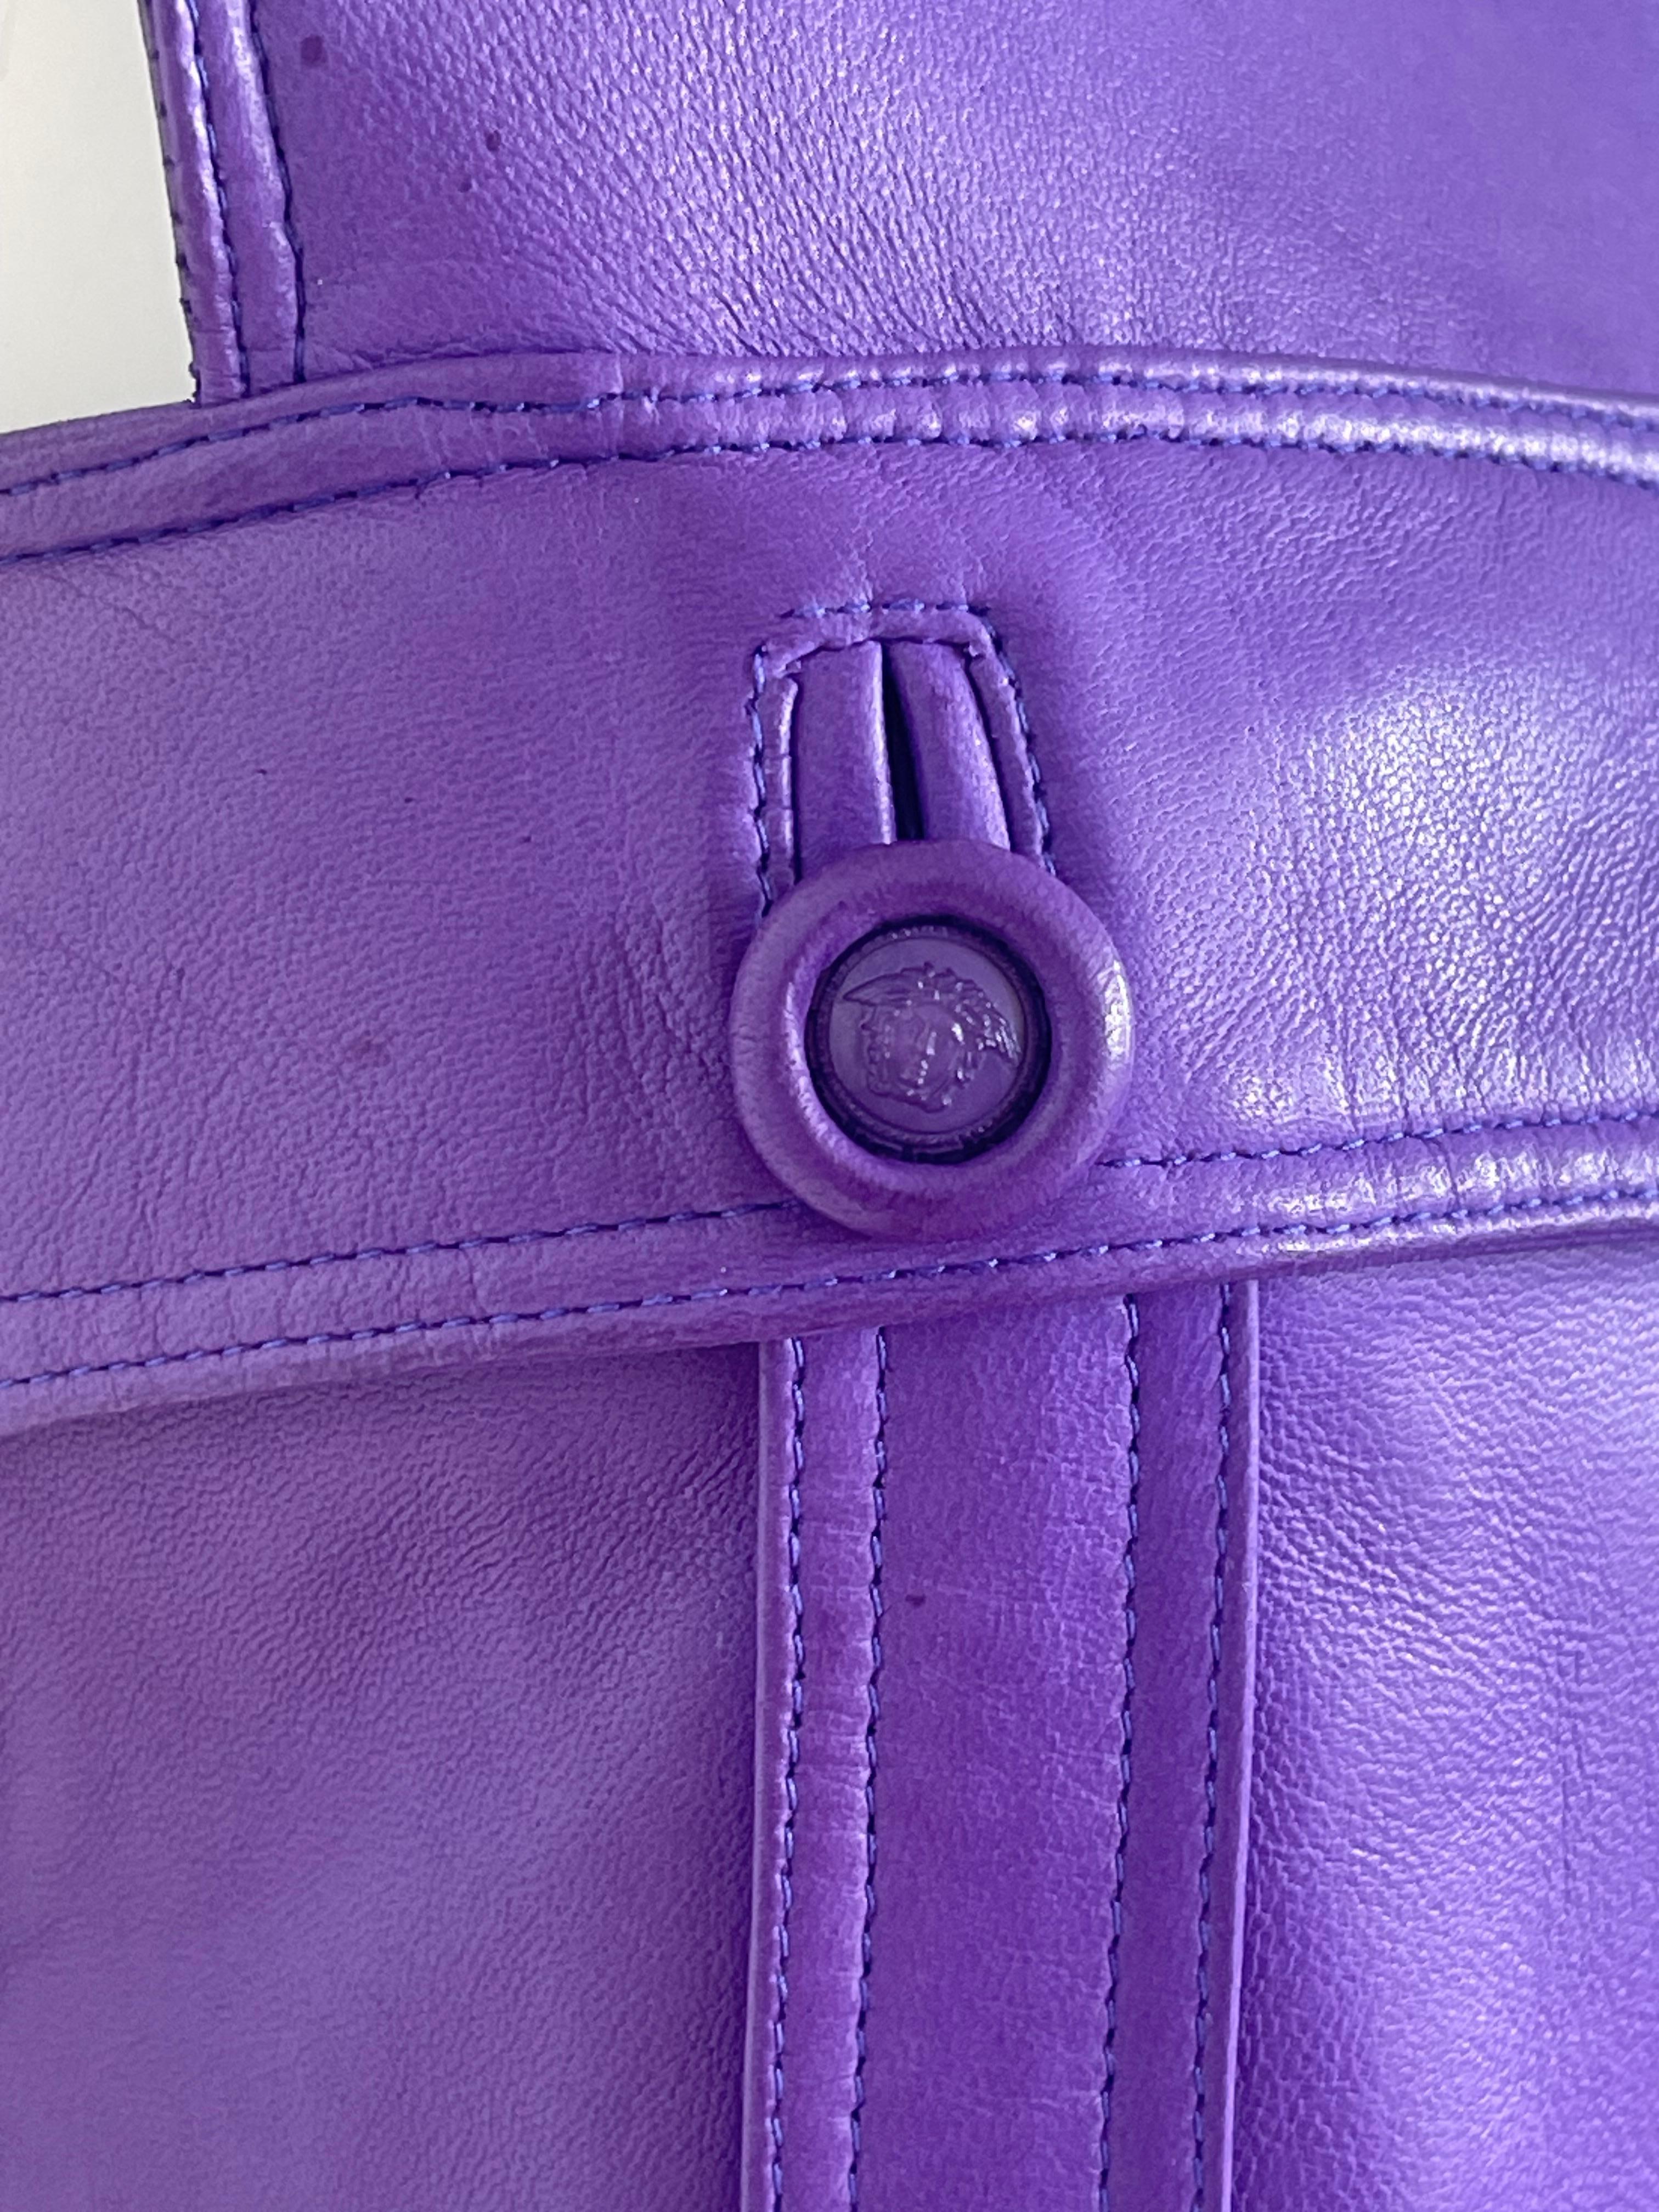 Men's FW 1996 Versace purple leather shift dress with medusa buttons For Sale